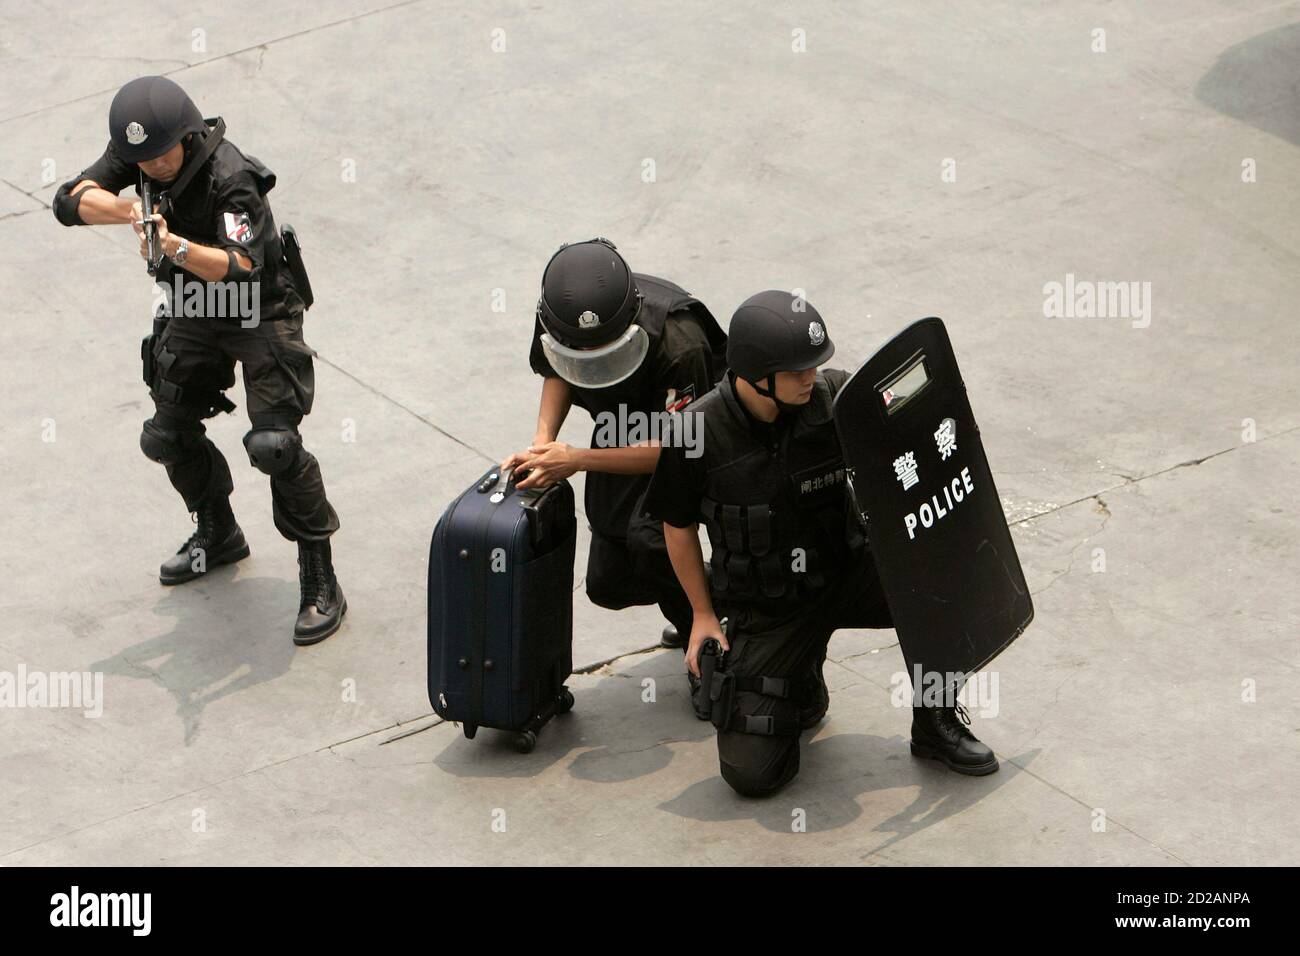 Chinese special forces take position during a security drill at a coach  station in Shanghai July 16, 2008. REUTERS/Aly Song (CHINA) (BEIJING  OLYMPICS 2008 PREVIEW Stock Photo - Alamy